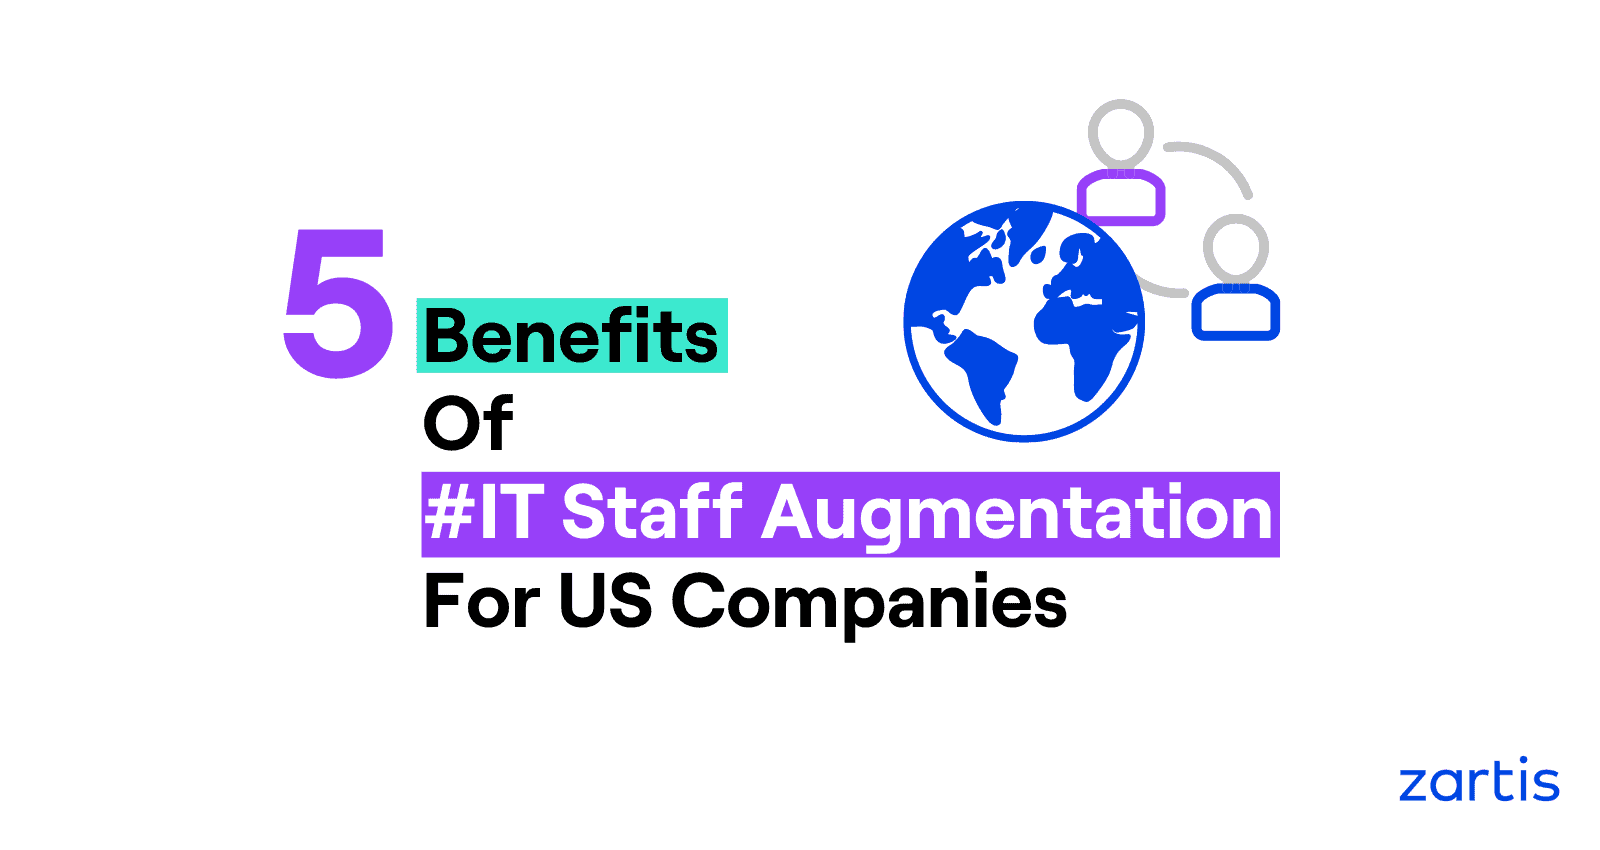 IT staff augmentation services for companies looking to extended their software teams